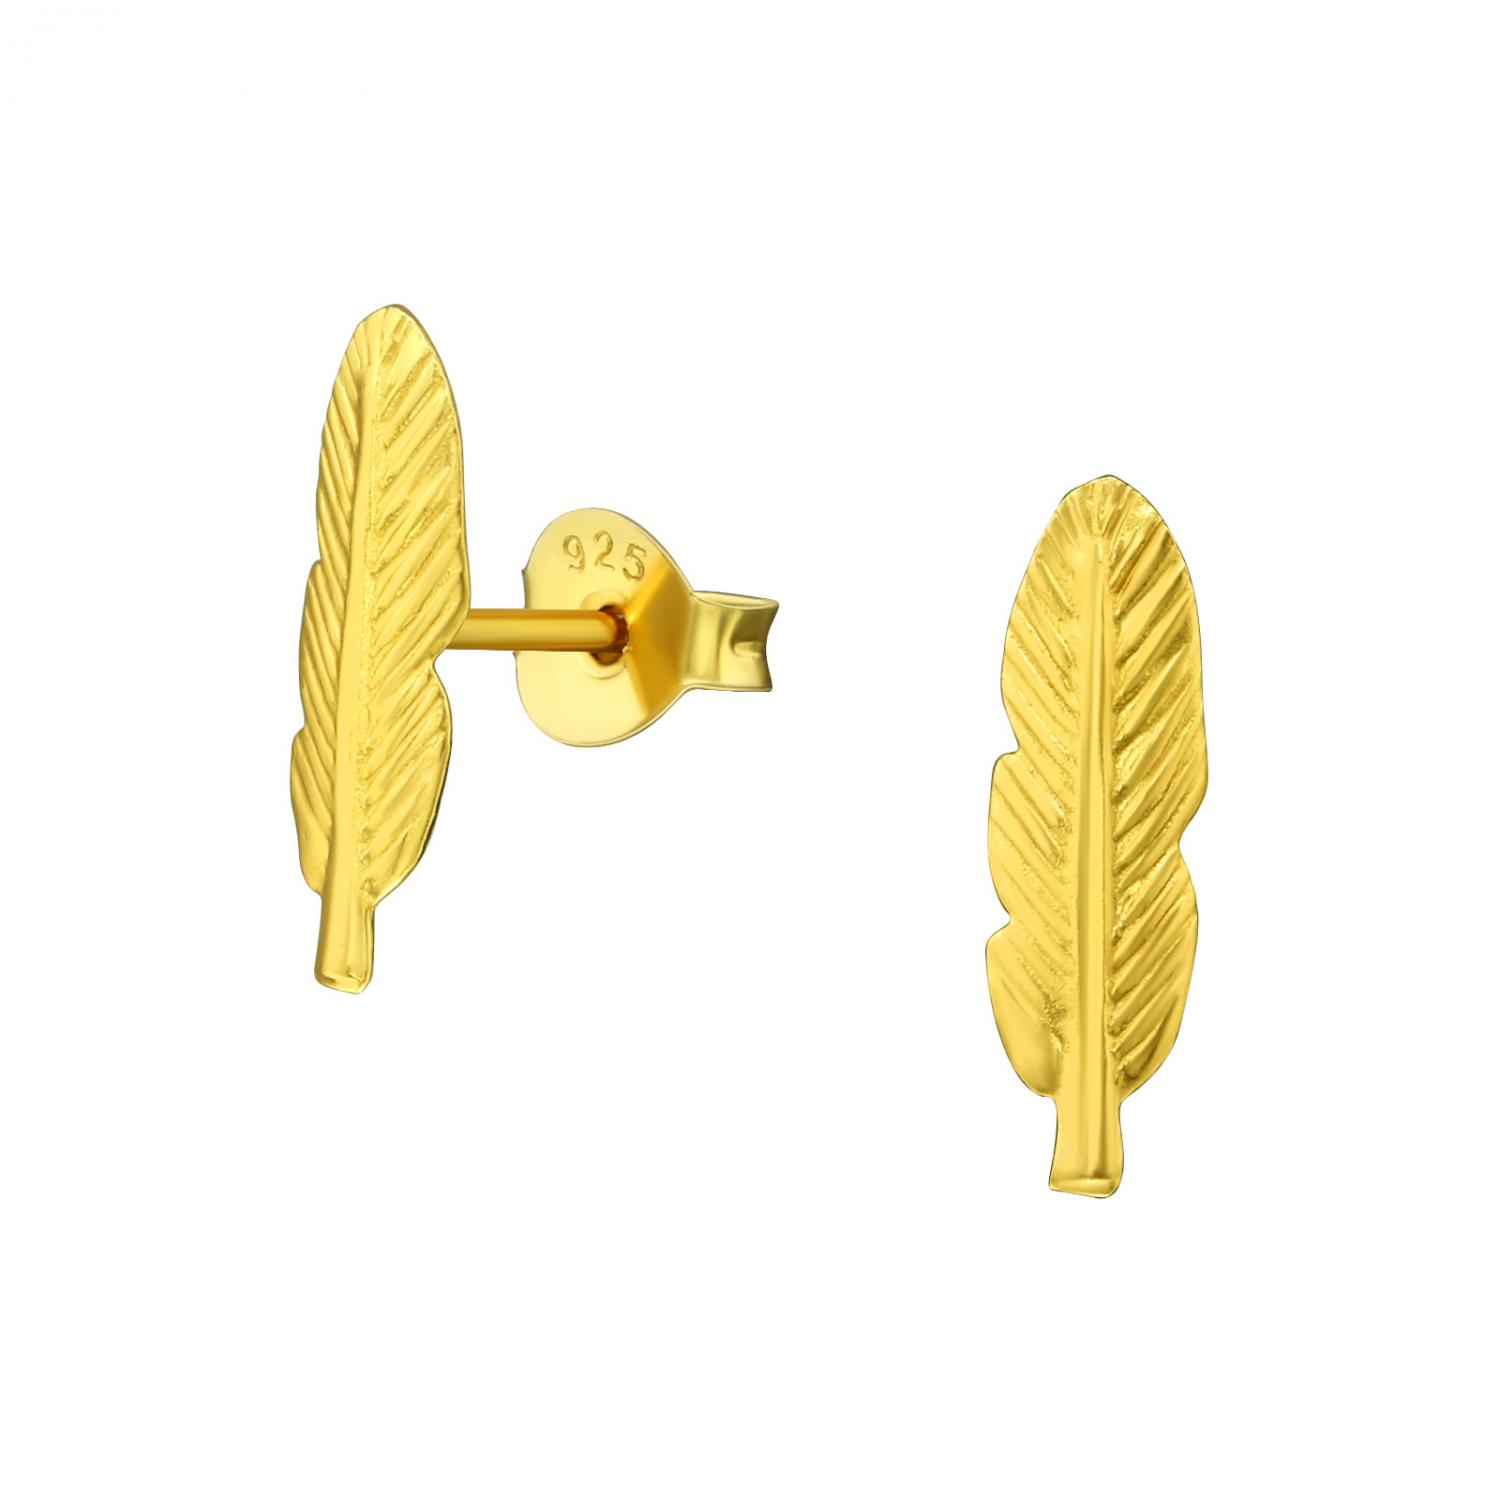 Details about   Antique Feather Stud 925 Sterling Silver Push Back Earrings